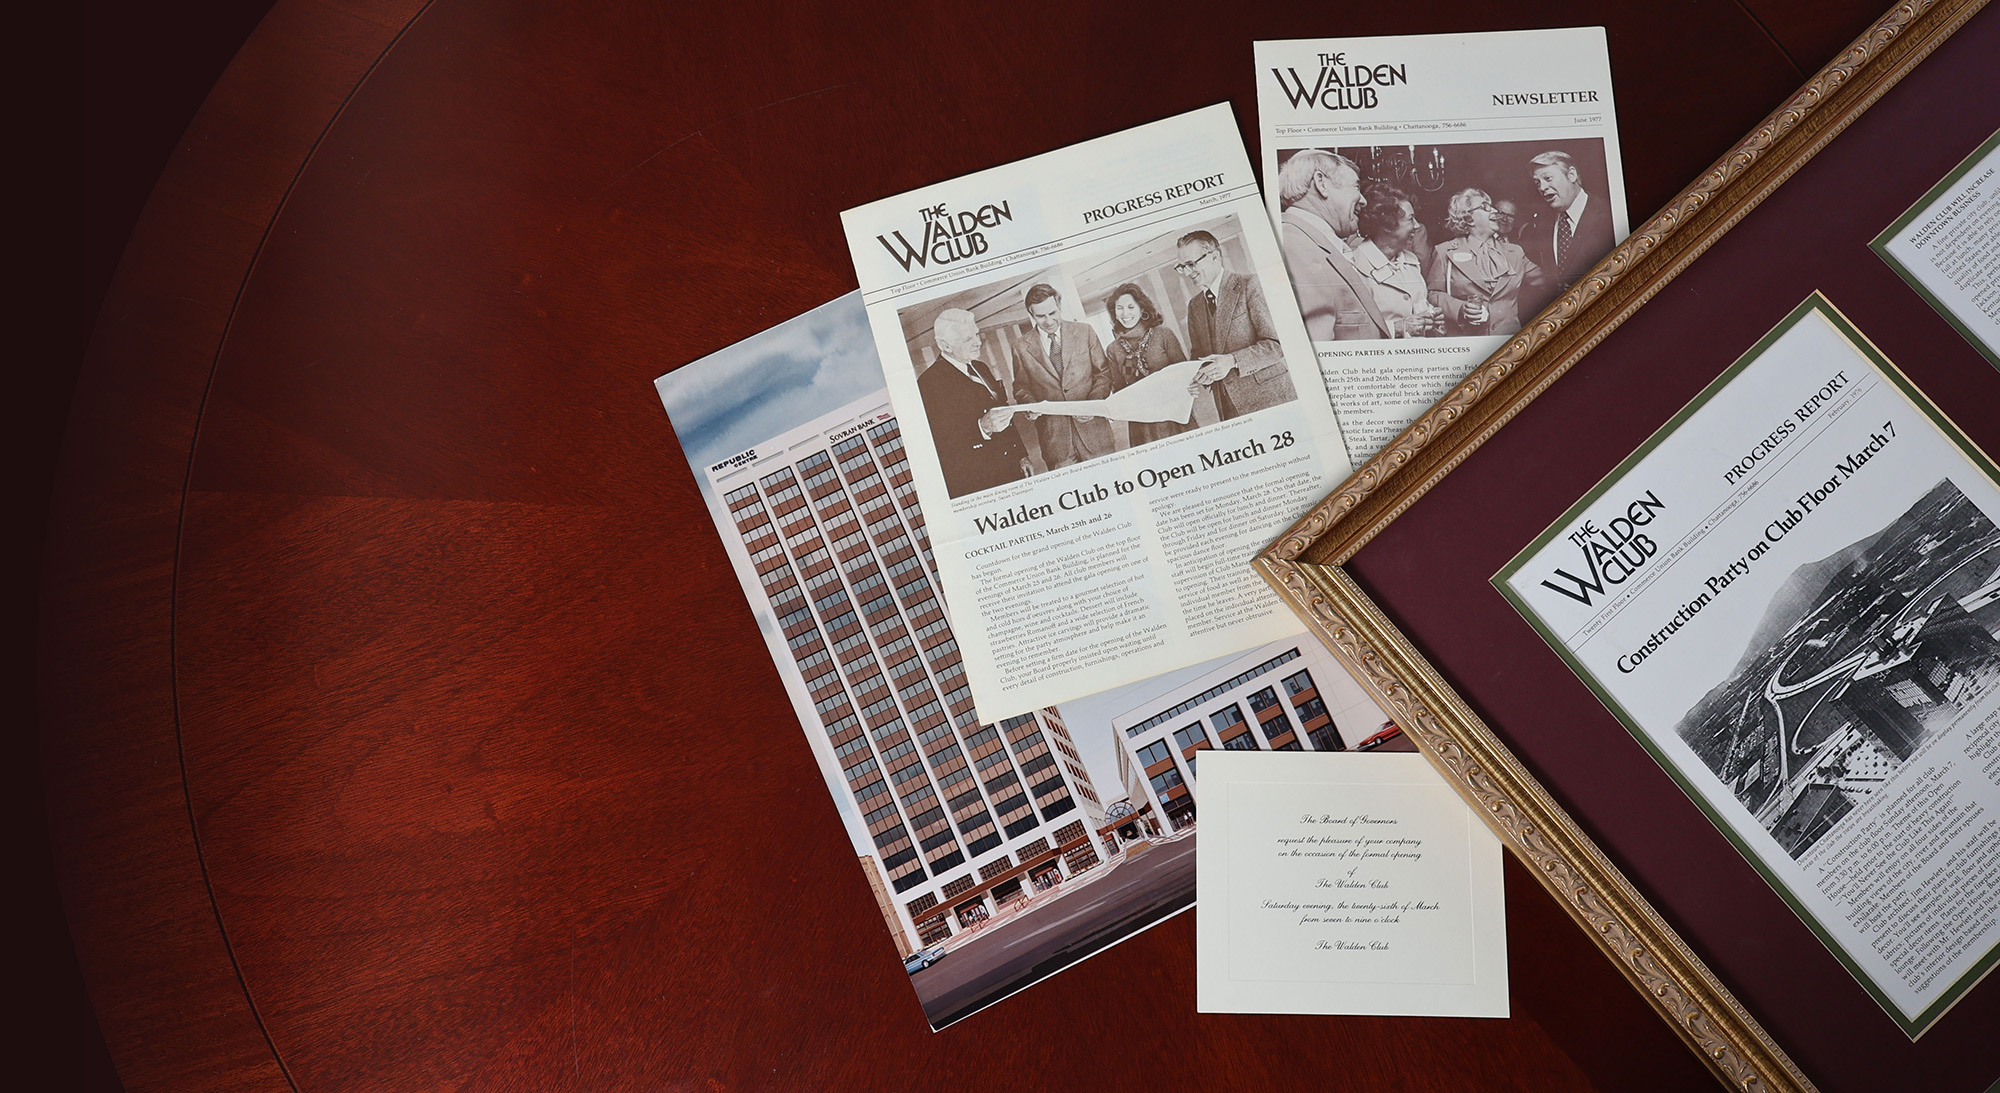 Newsletter articles and images from when the Walden Club began.